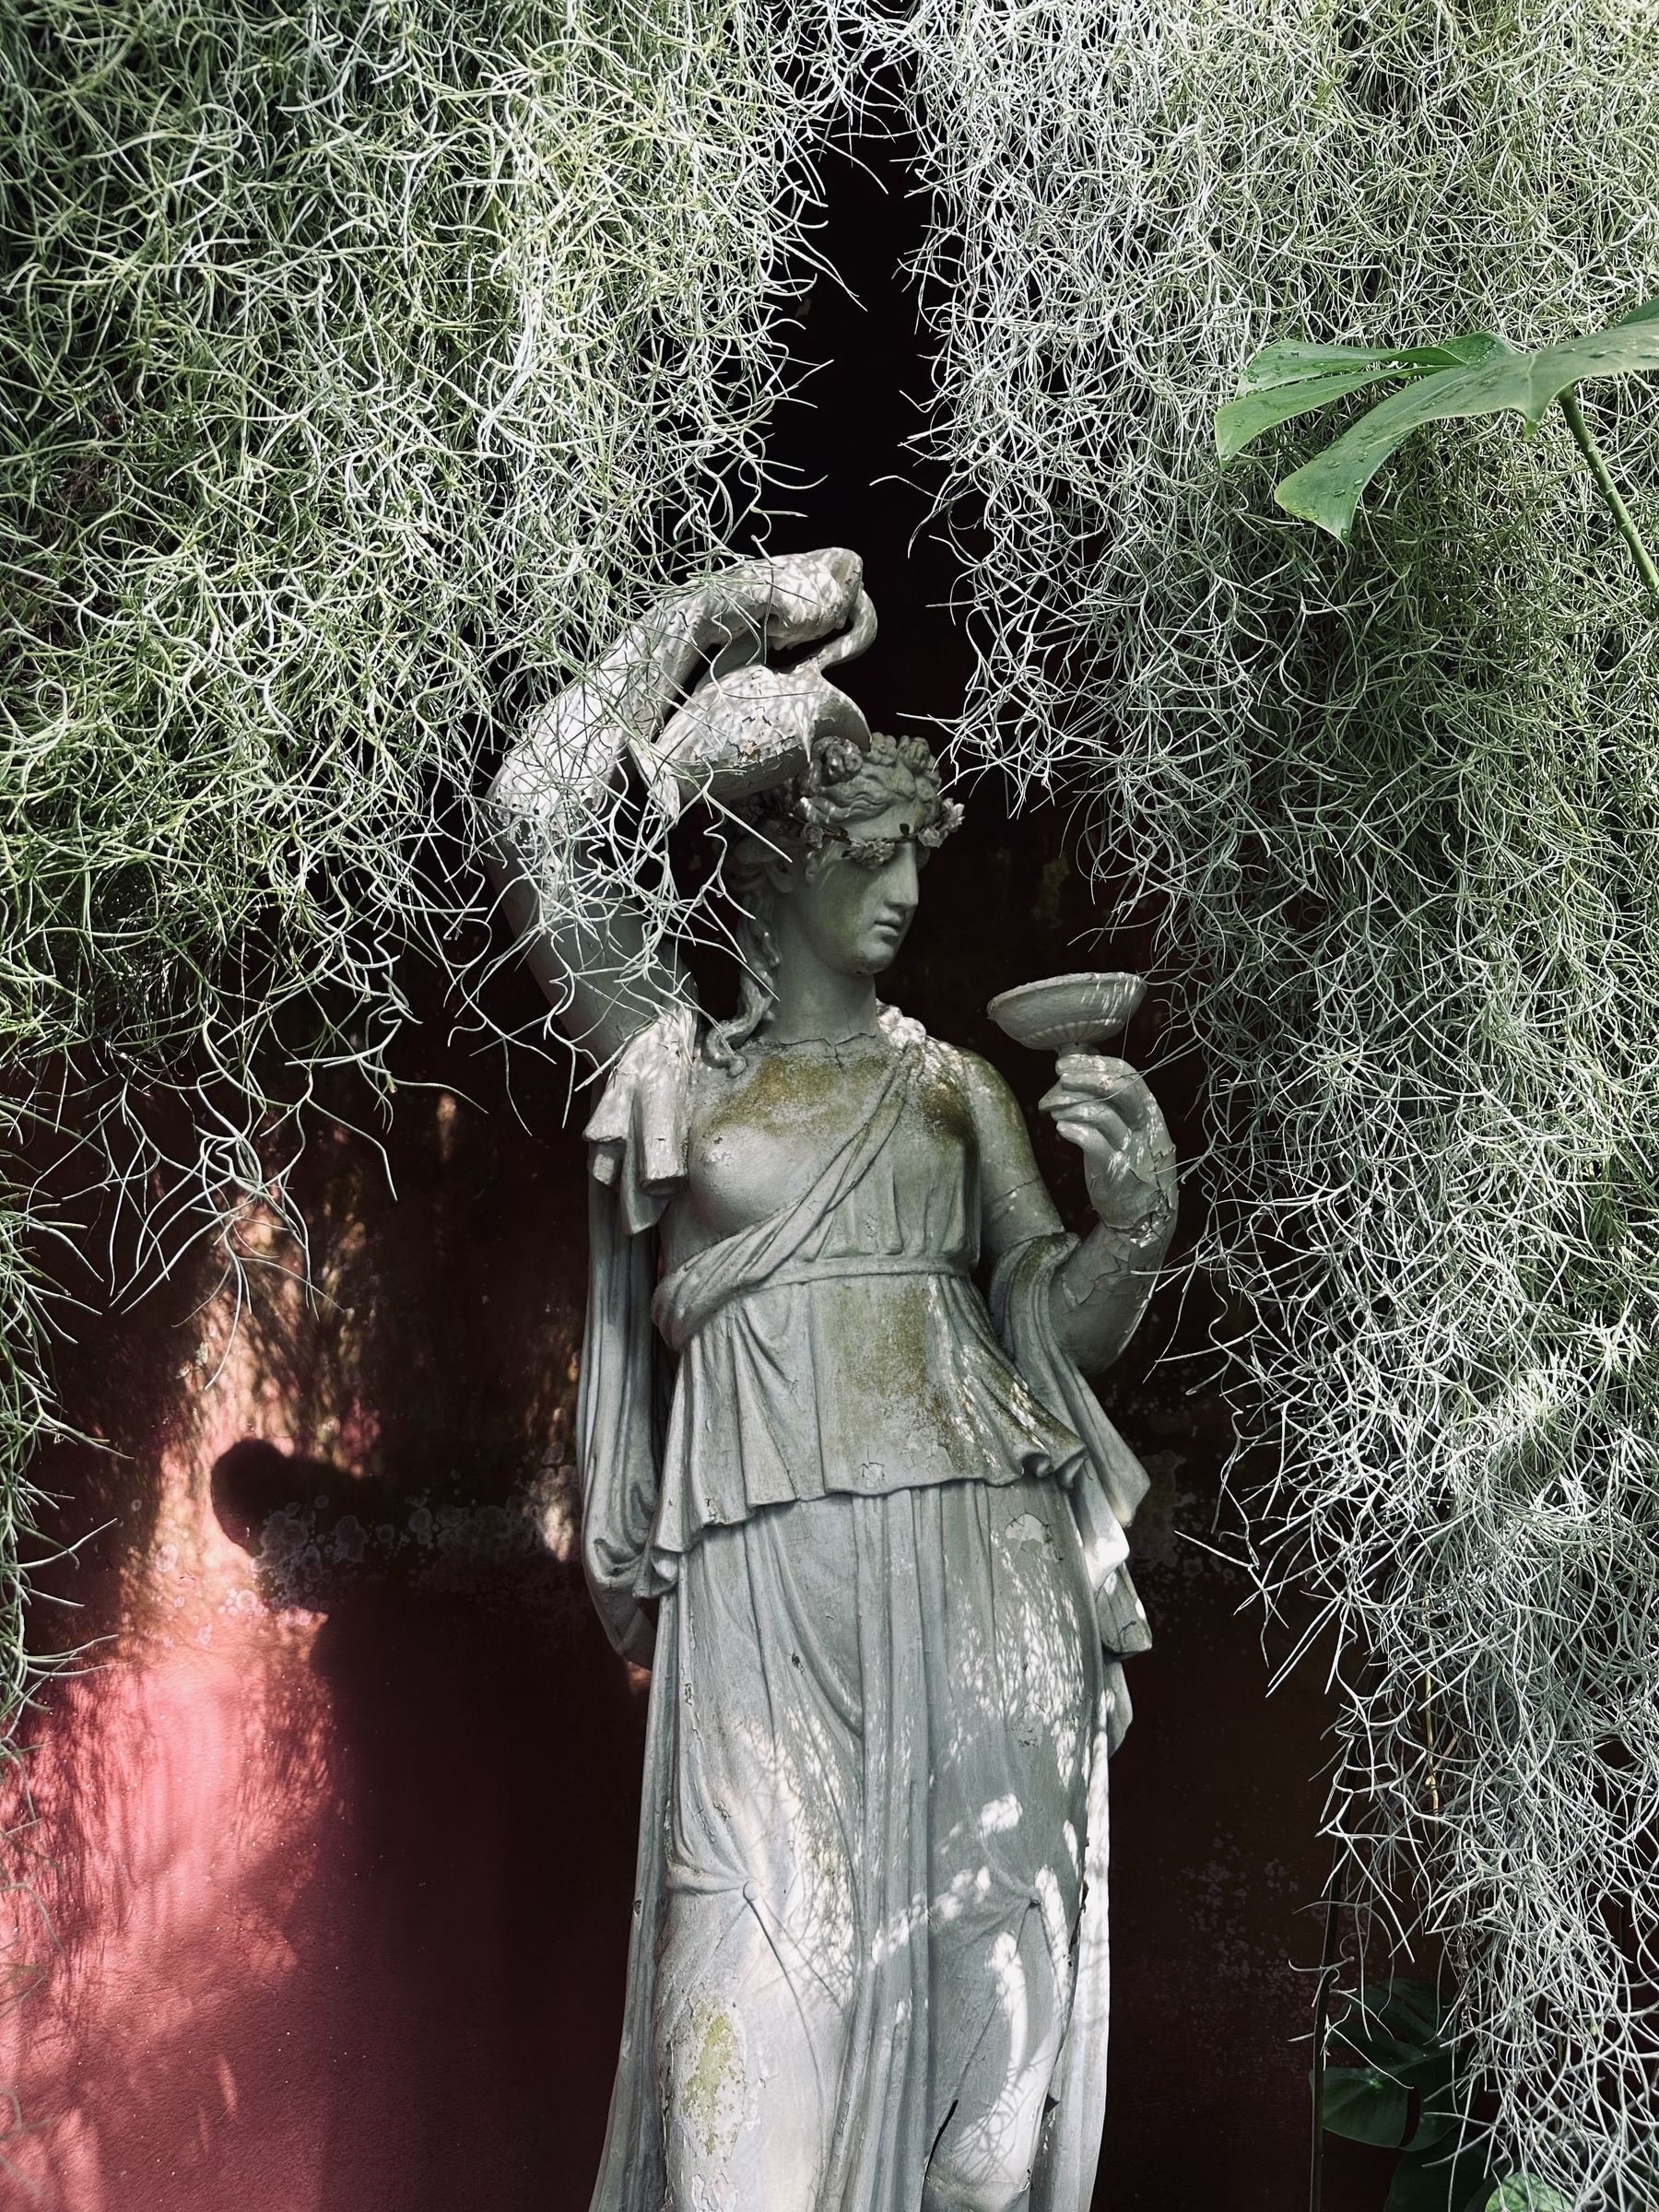 A statue partially hidden by foliage.